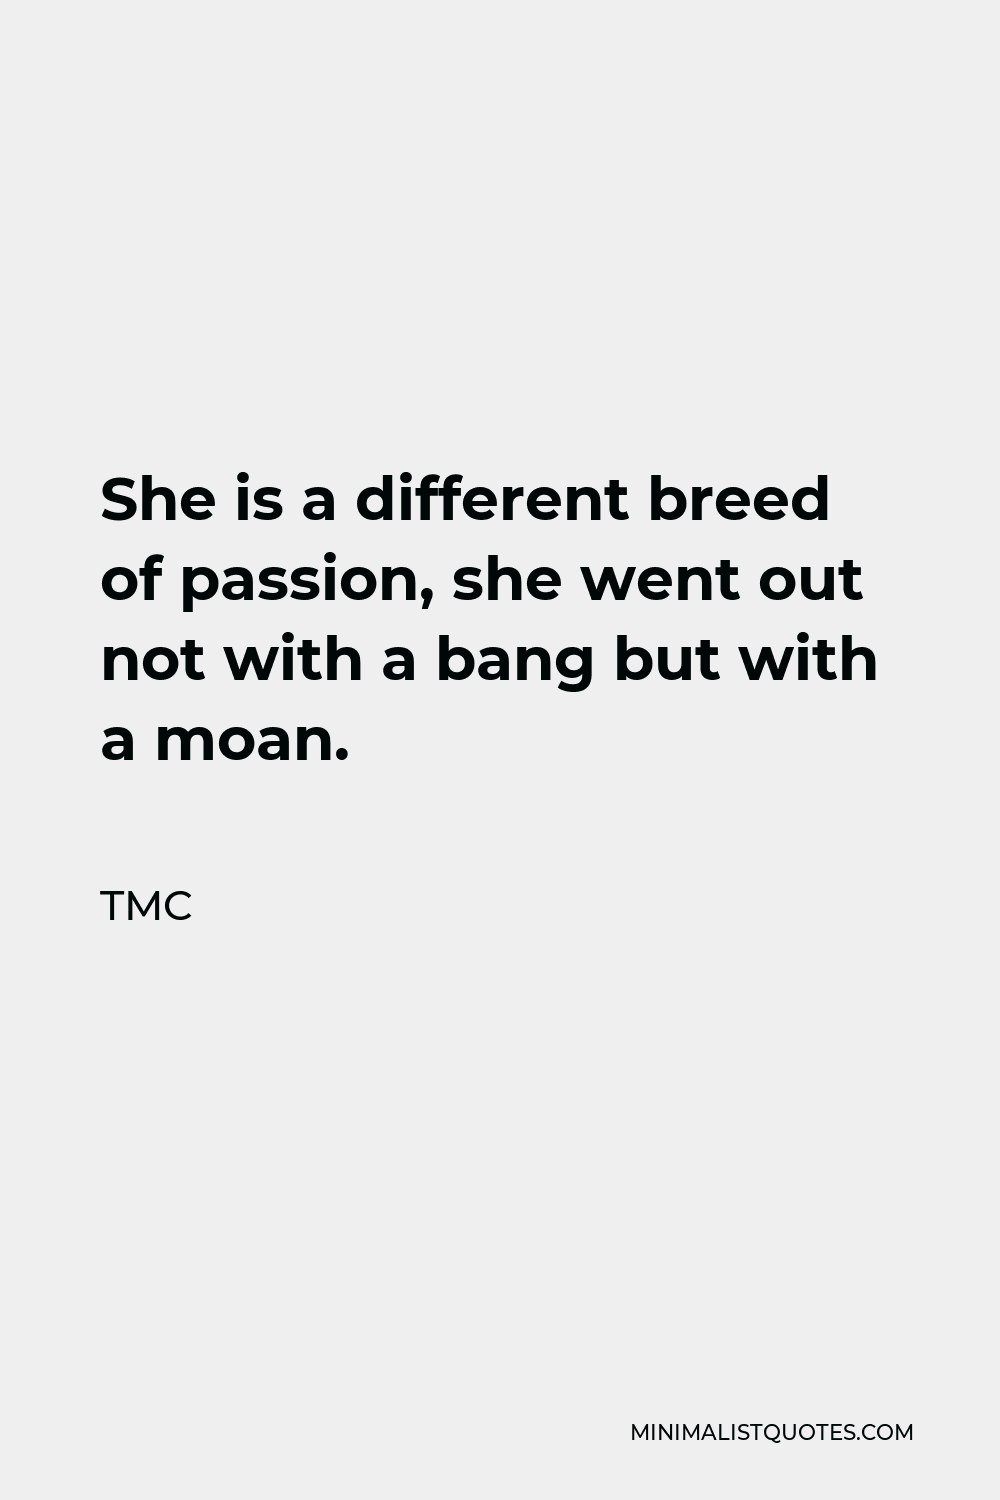 TMC Quote - She is a different breed of passion, she went out not with a bang but with a moan.